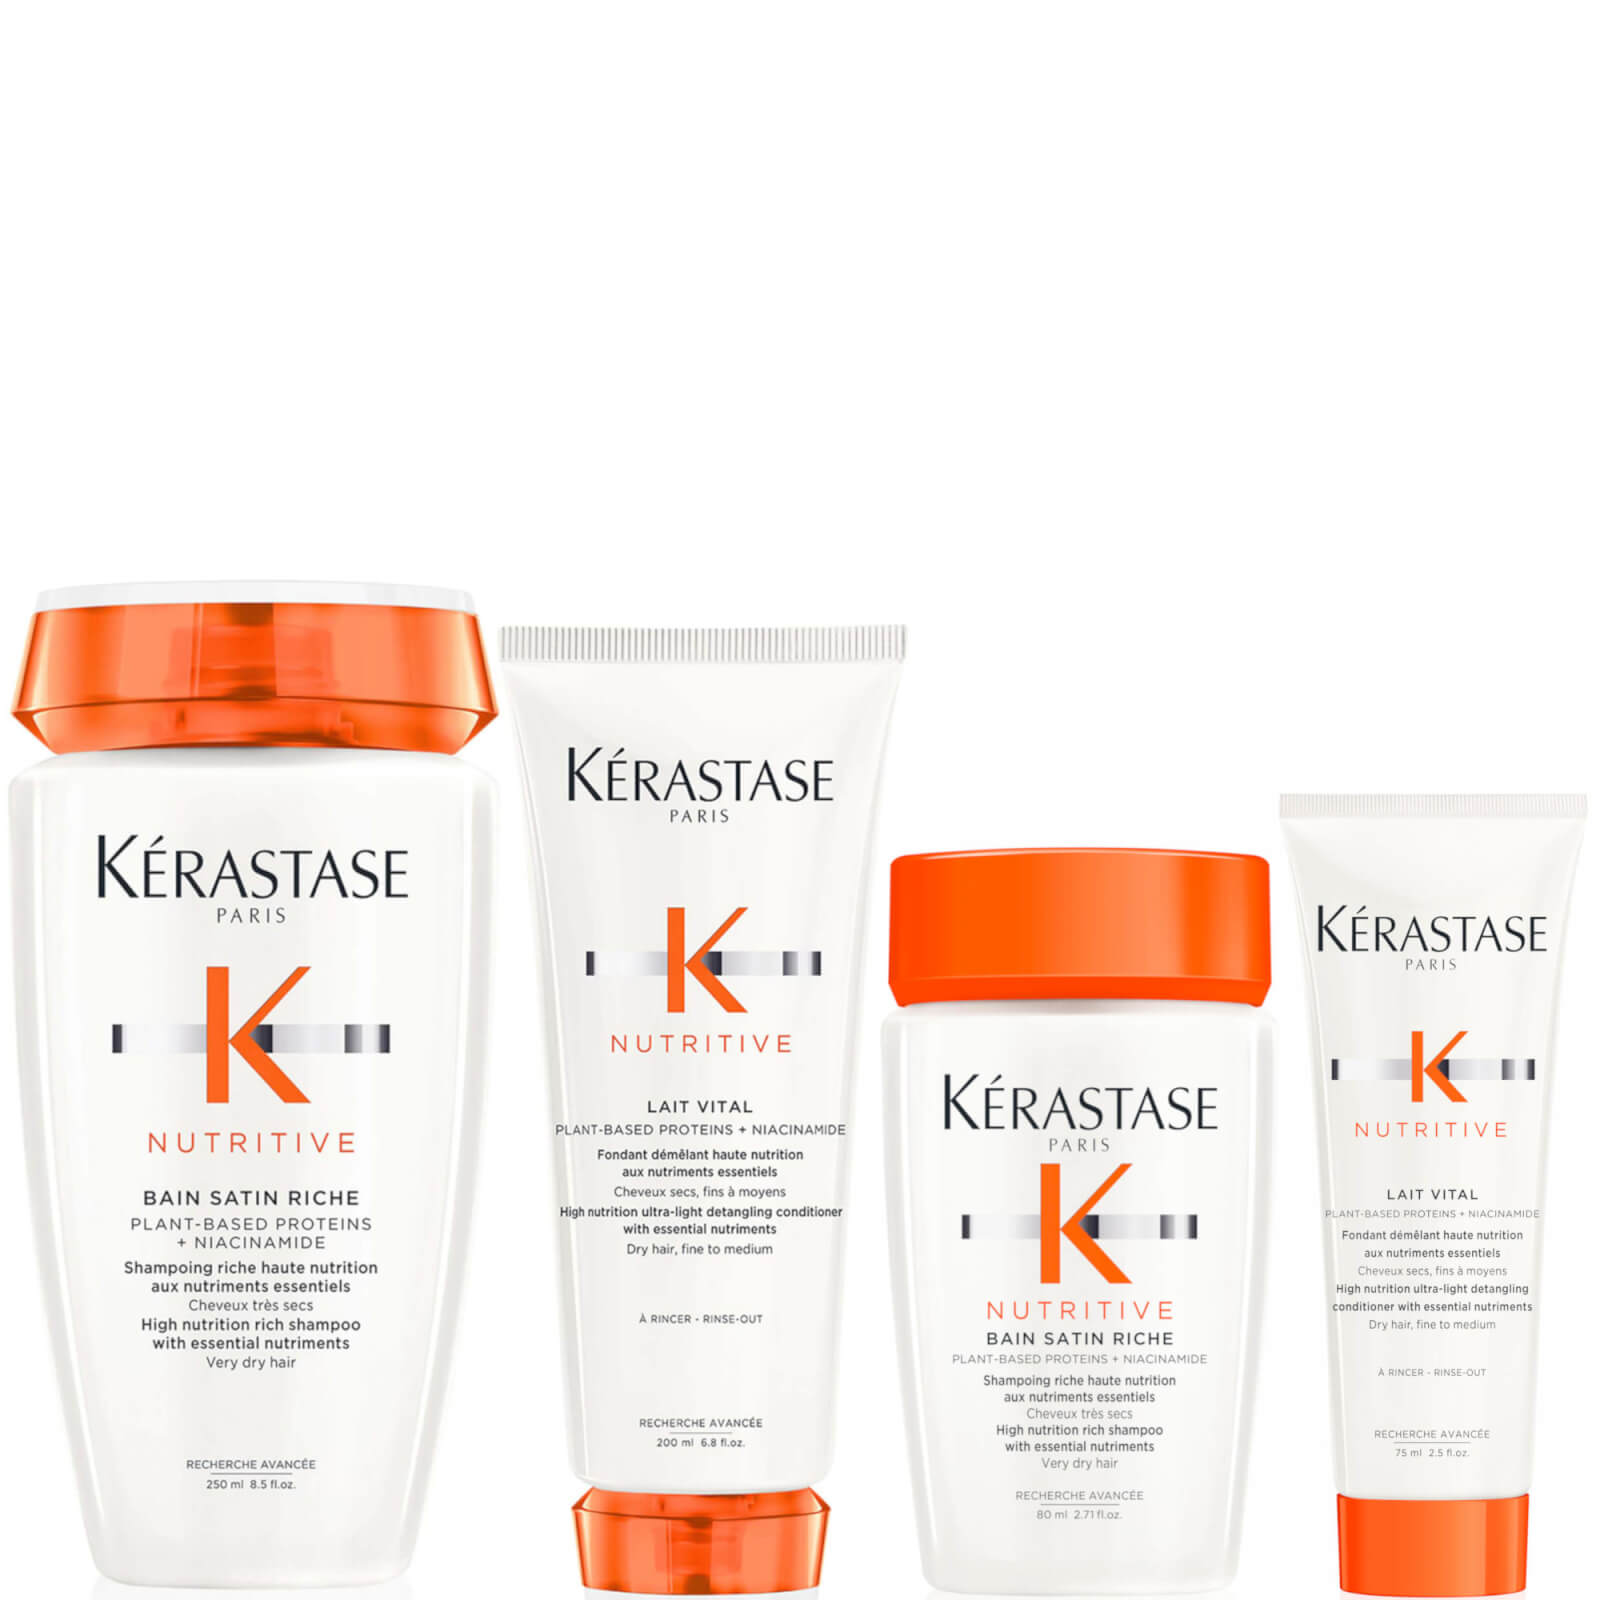 Kerastase Nutritive Nourish and Hydrate Duo for Medium/Thick Very Dry Hair and Free Travel Size Duo